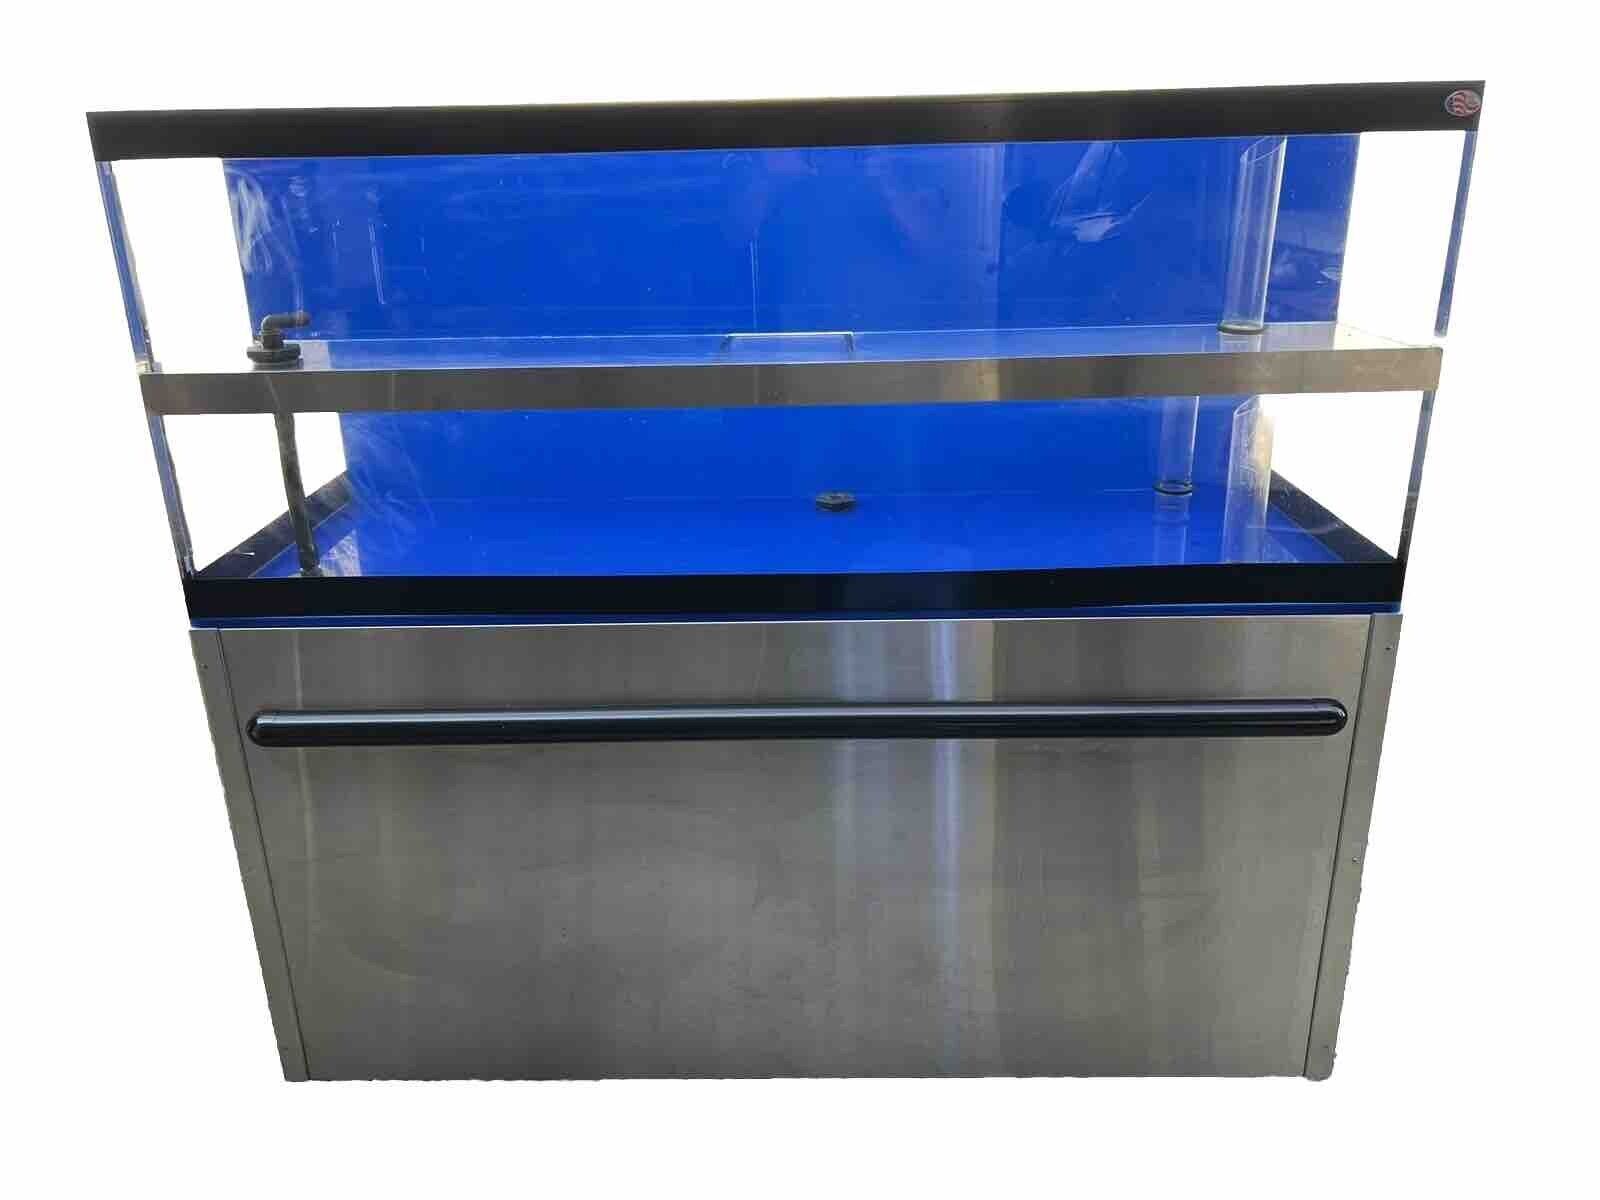 Used L150 Lobster/Crab Tank, Made In USA By Lobsterlife.